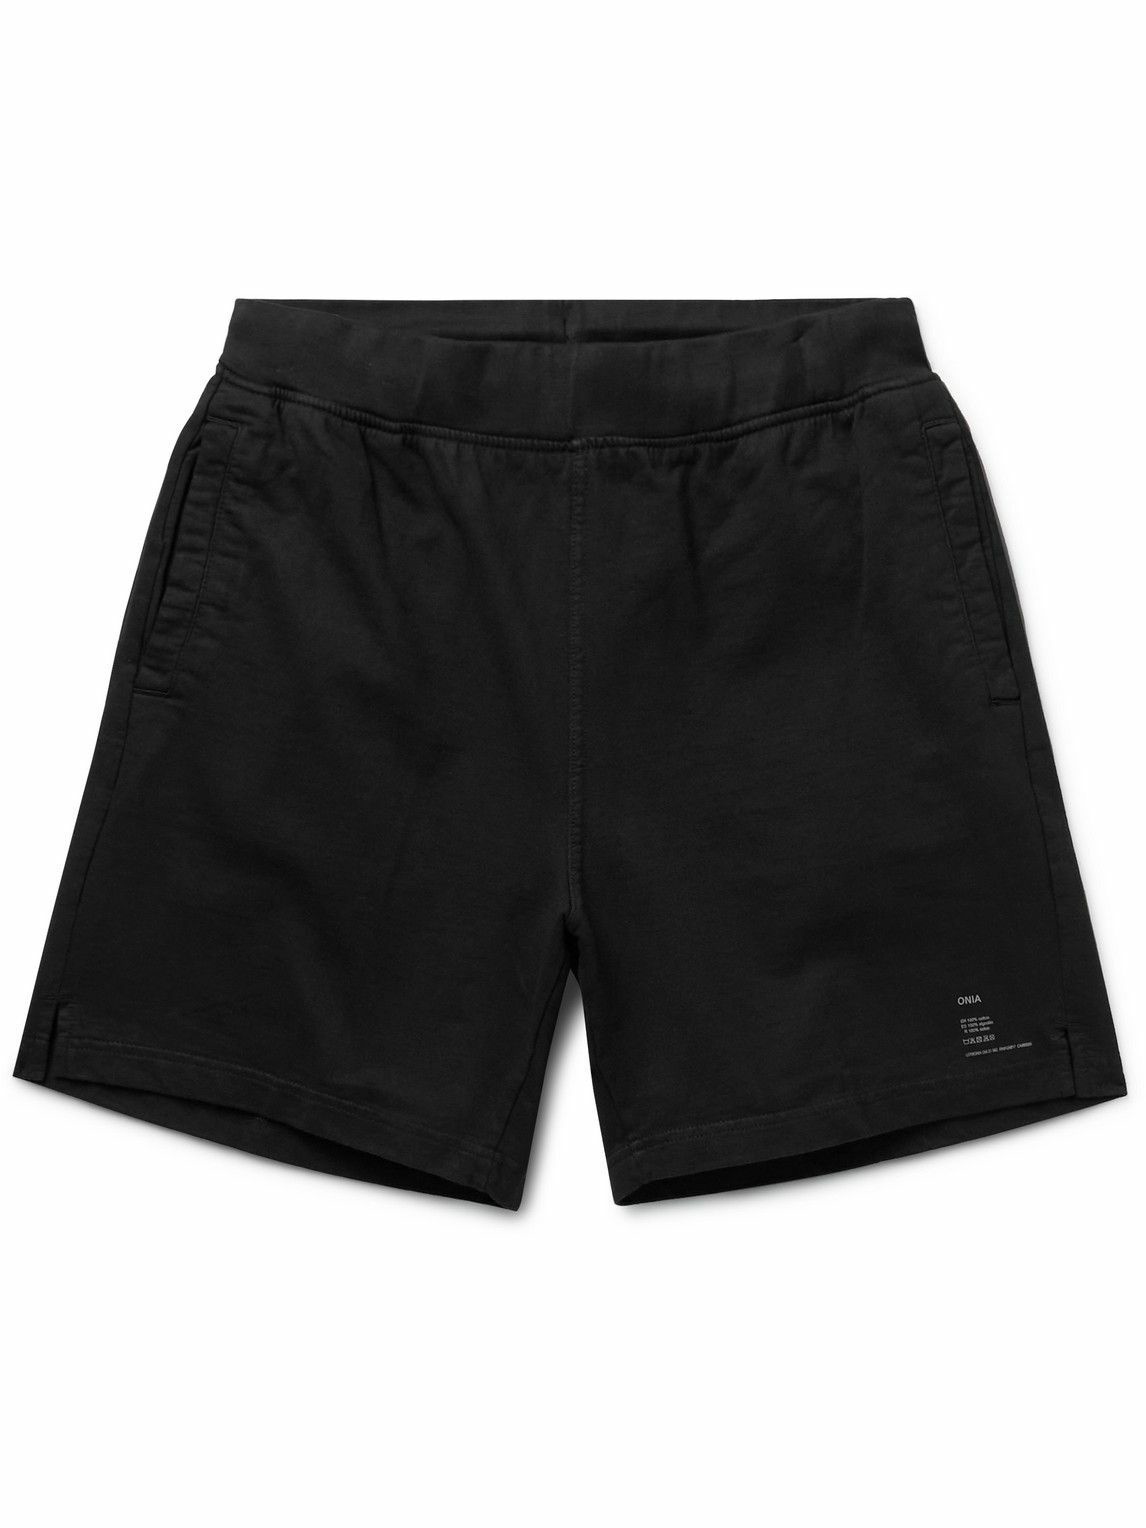 Onia - Slim-Fit Garment-Dyed Cotton-Jersey Shorts - Black Onia